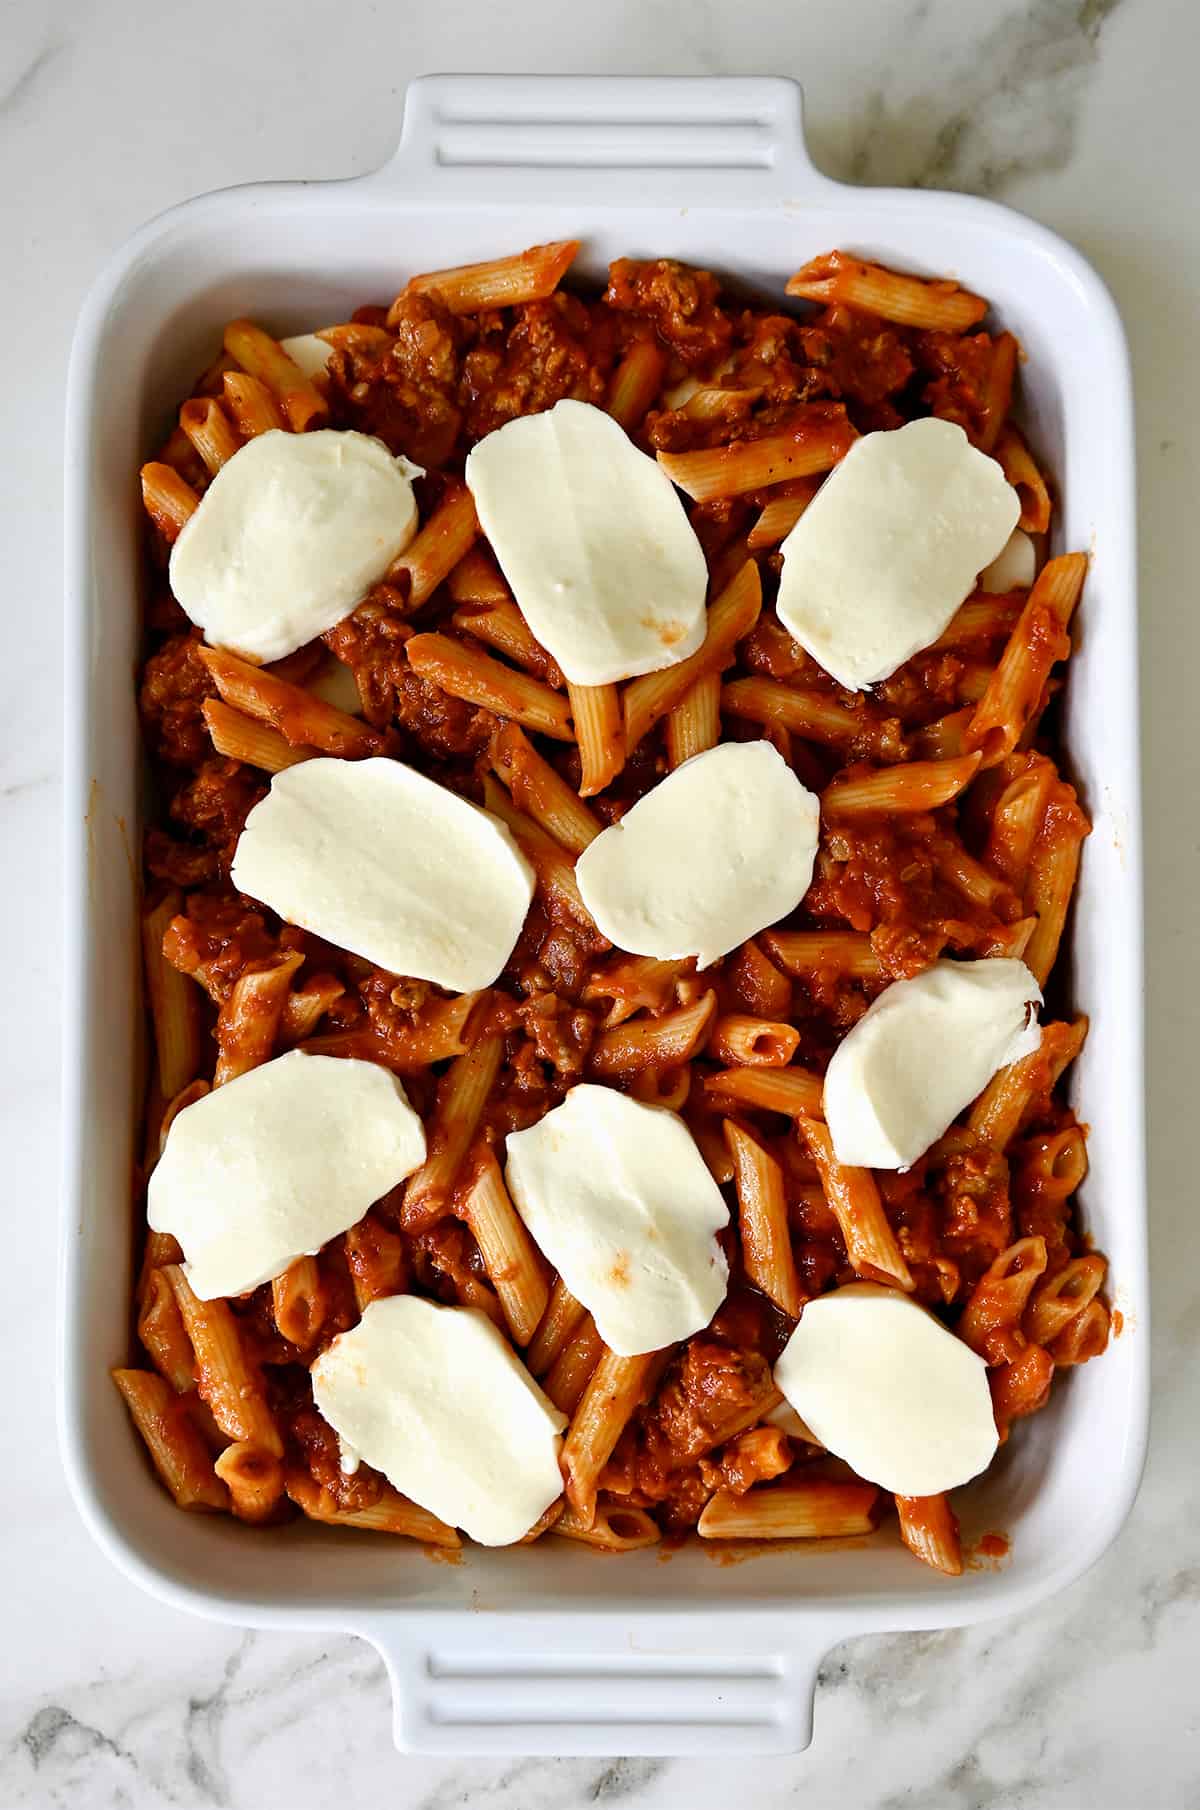 Slices of fresh mozzarella atop penne pasta with a bolognese sauce in a white baking dish.